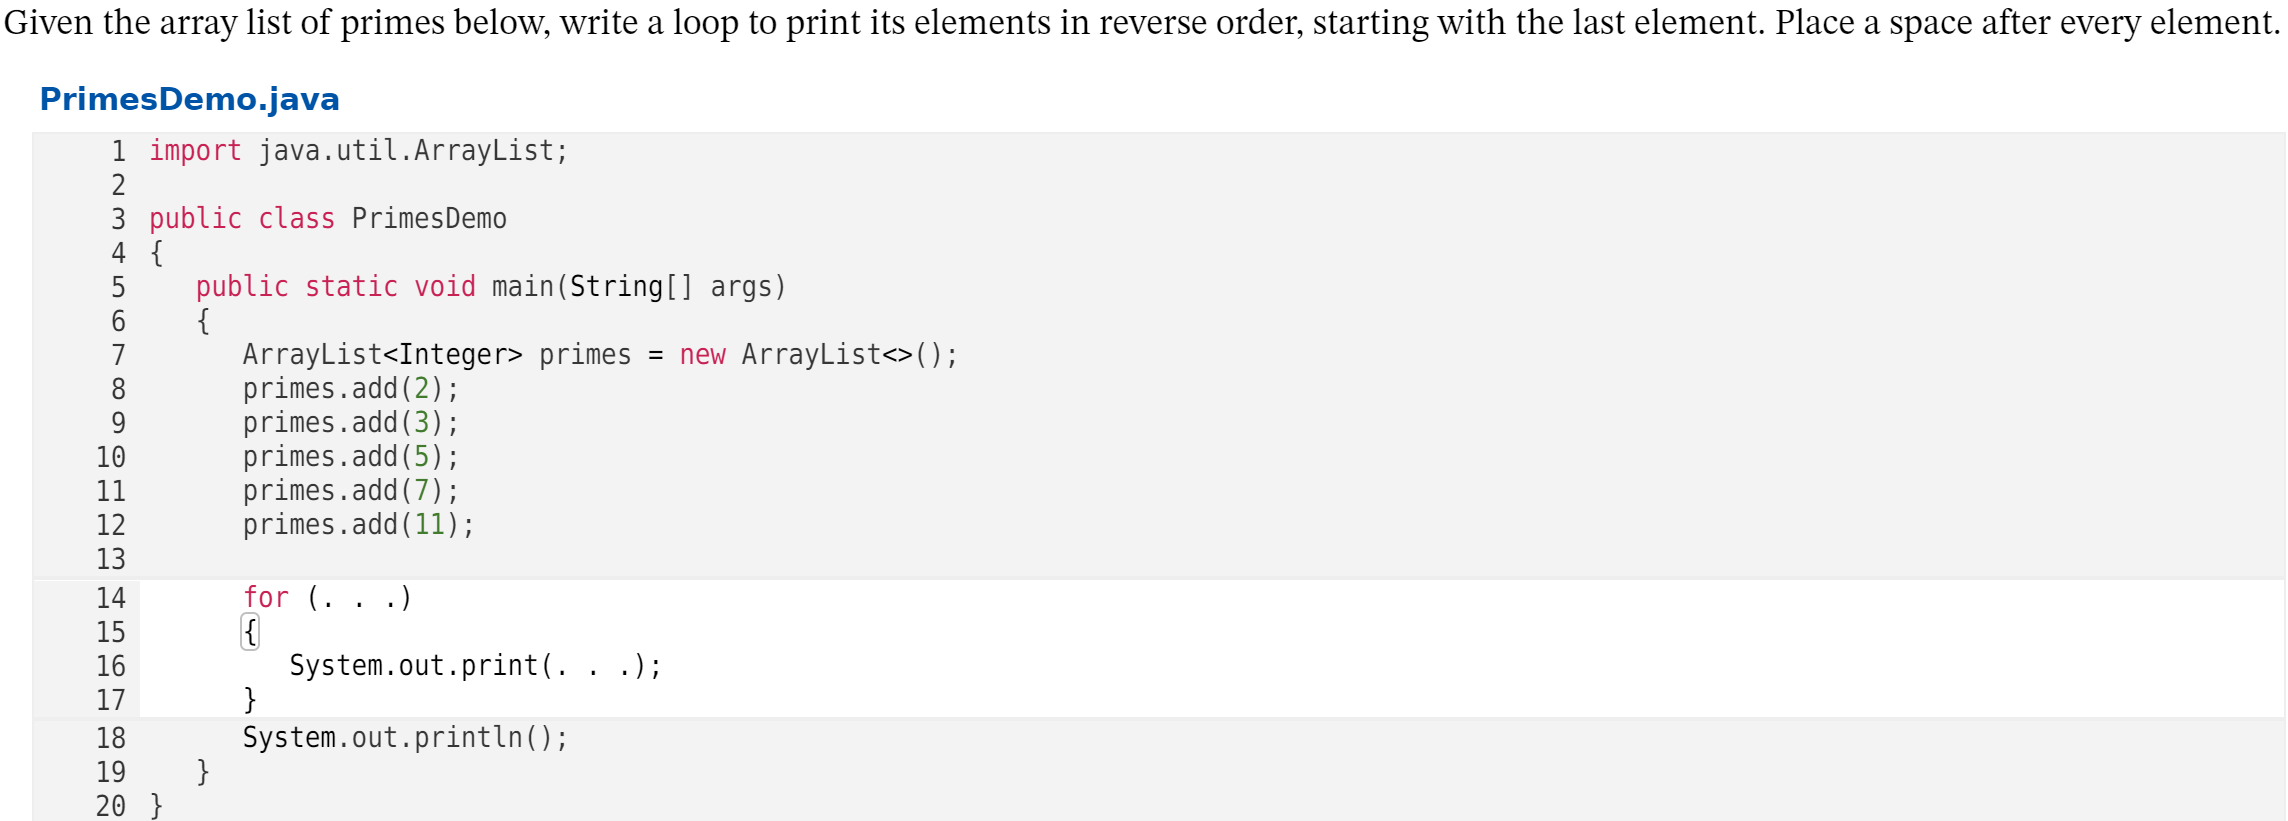 Given the array list of primes below, write a loop to print its elements in reverse order, starting with the last element. Place a space after every element.
PrimesDemo.java
1 import java.util.ArrayList;
2
3 public class PrimesDemo
4 {
public static void main(String[] args)
{
ArrayList<Integer> primes = new ArrayList<>();
primes.add(2);
primes.add(3);
primes.add(5);
primes.add(7);
primes.add(11);
6
7
8
9
10
11
12
13
14
for (.
.)
15
System.out.print(. . .);
}
System.out.println();
}
16
17
18
19
